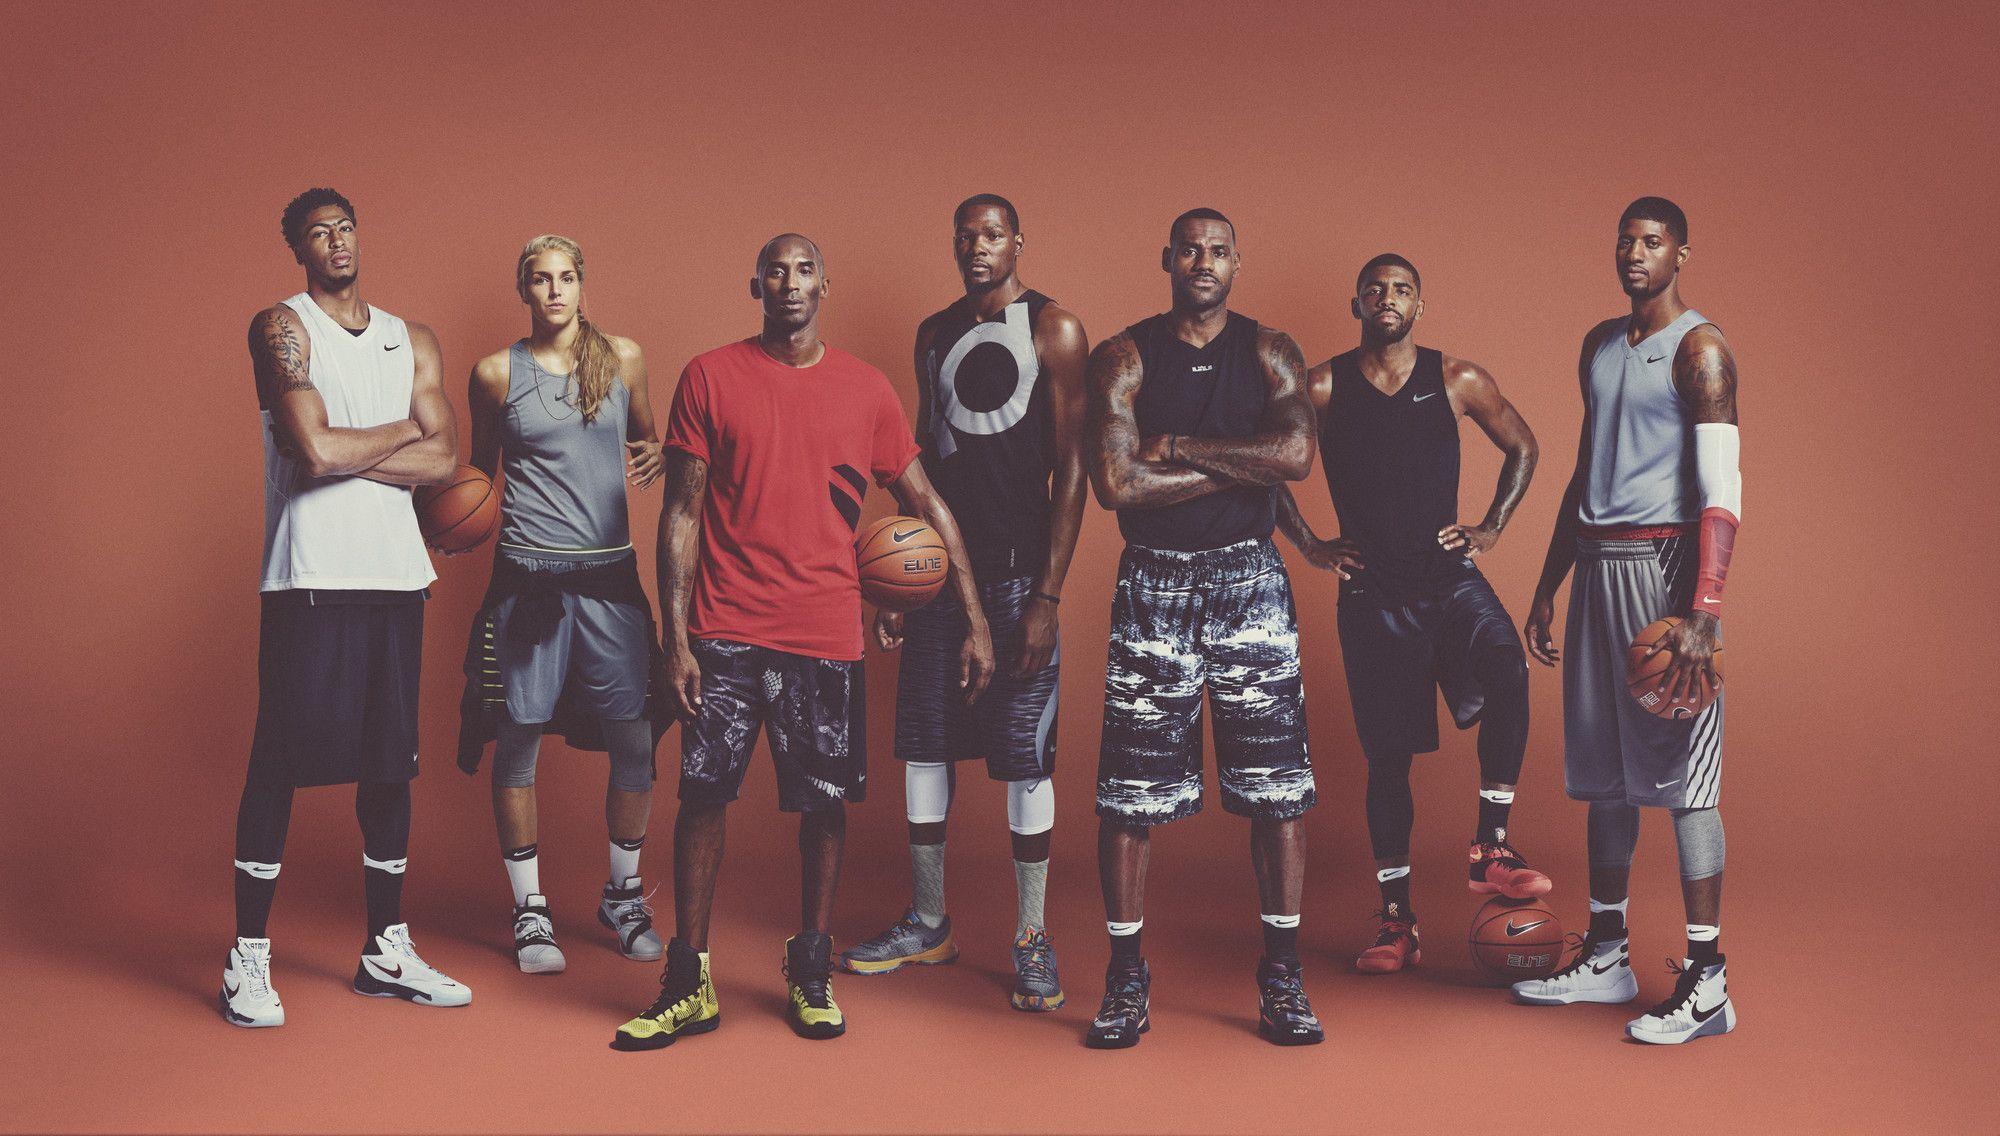 Nike Basketball&;s New Short Film: &;Bring Your Game&; VIDEO